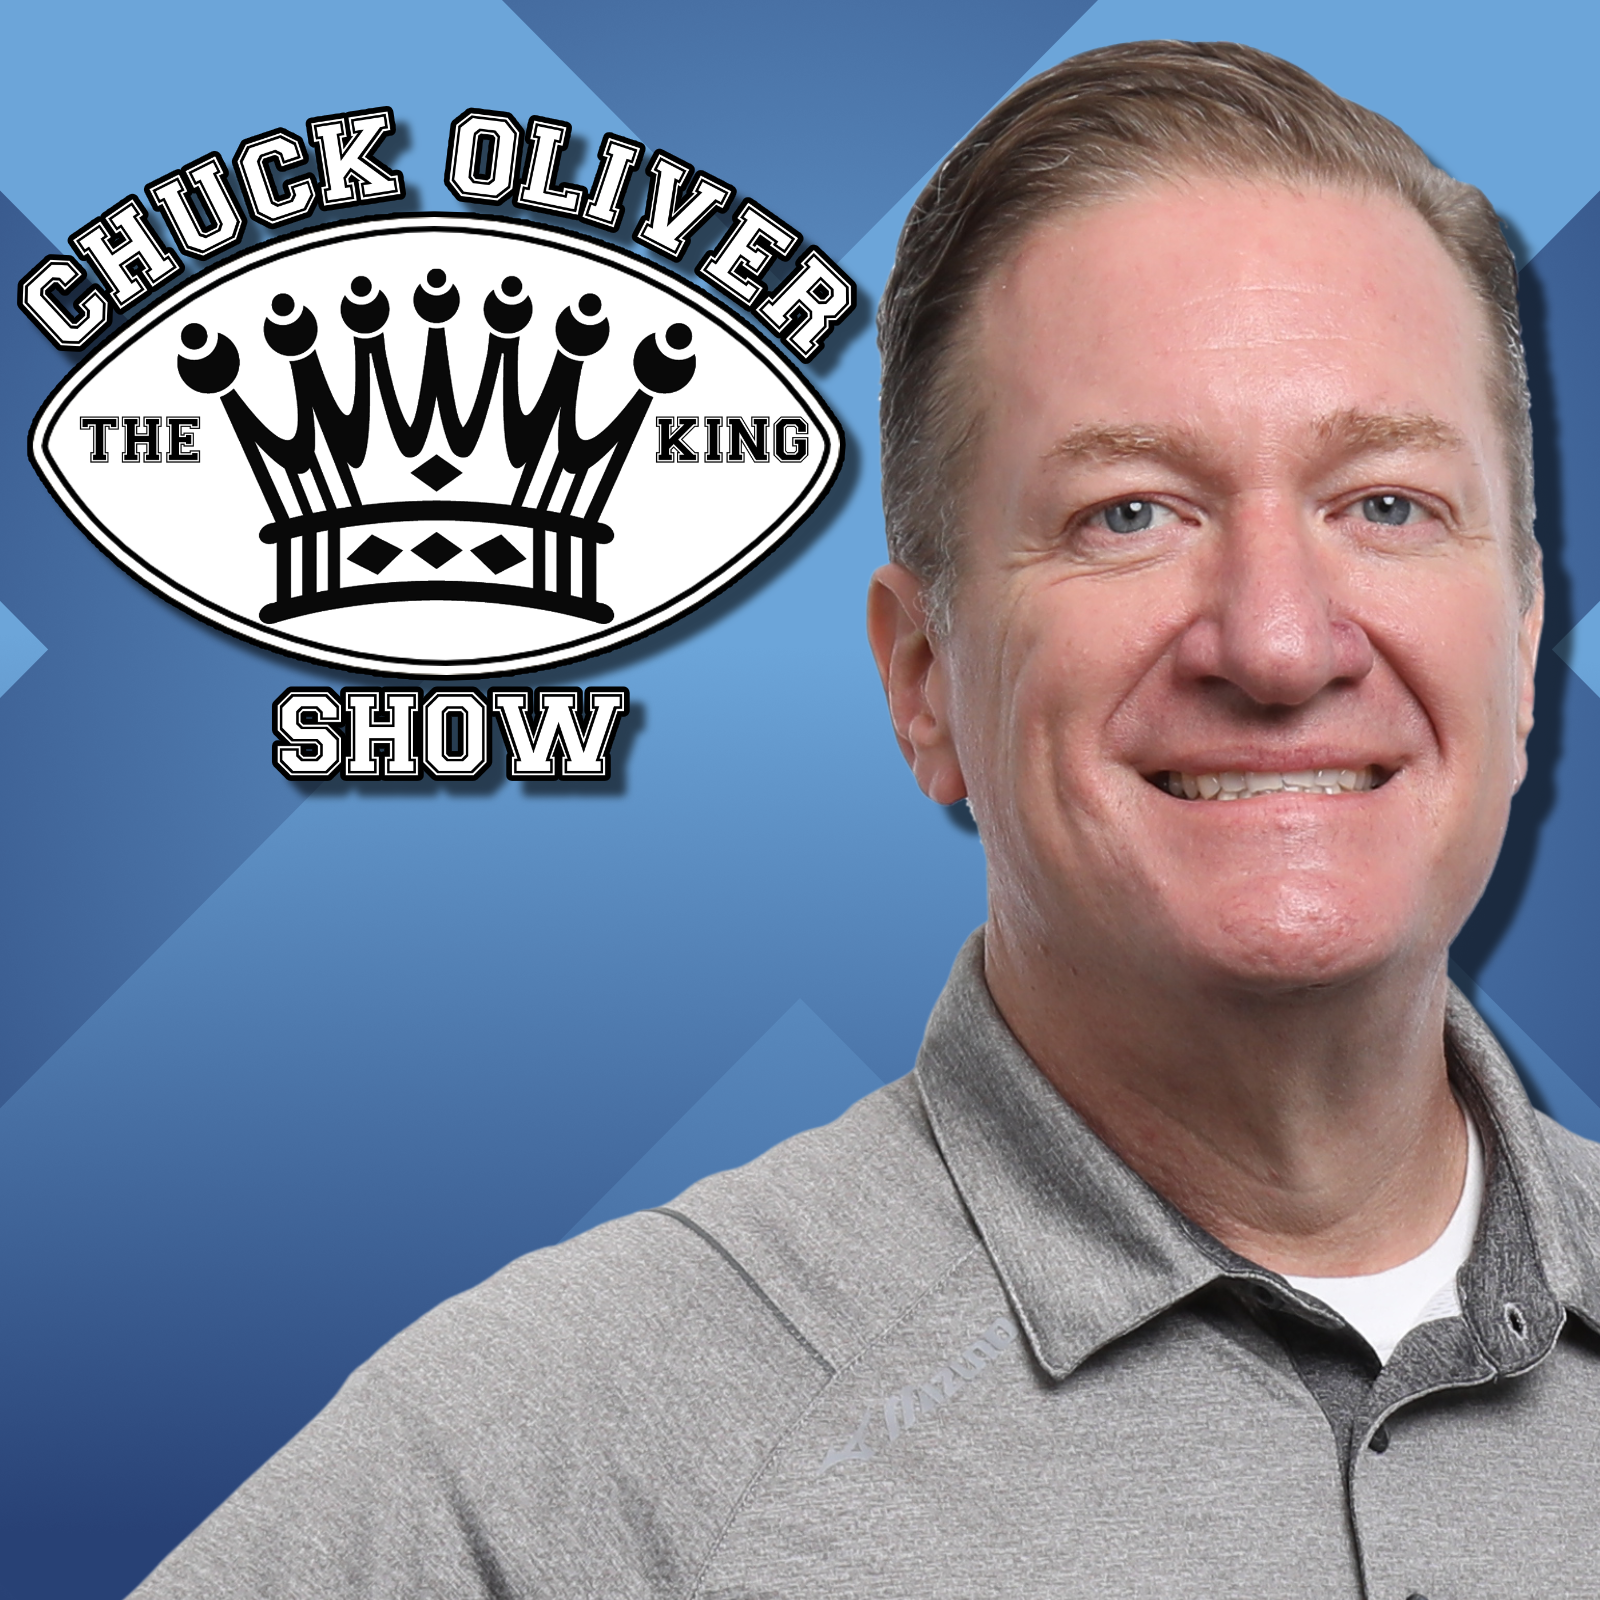 CHUCK OLIVER SHOW 4-12 FRIDAY HOUR 2